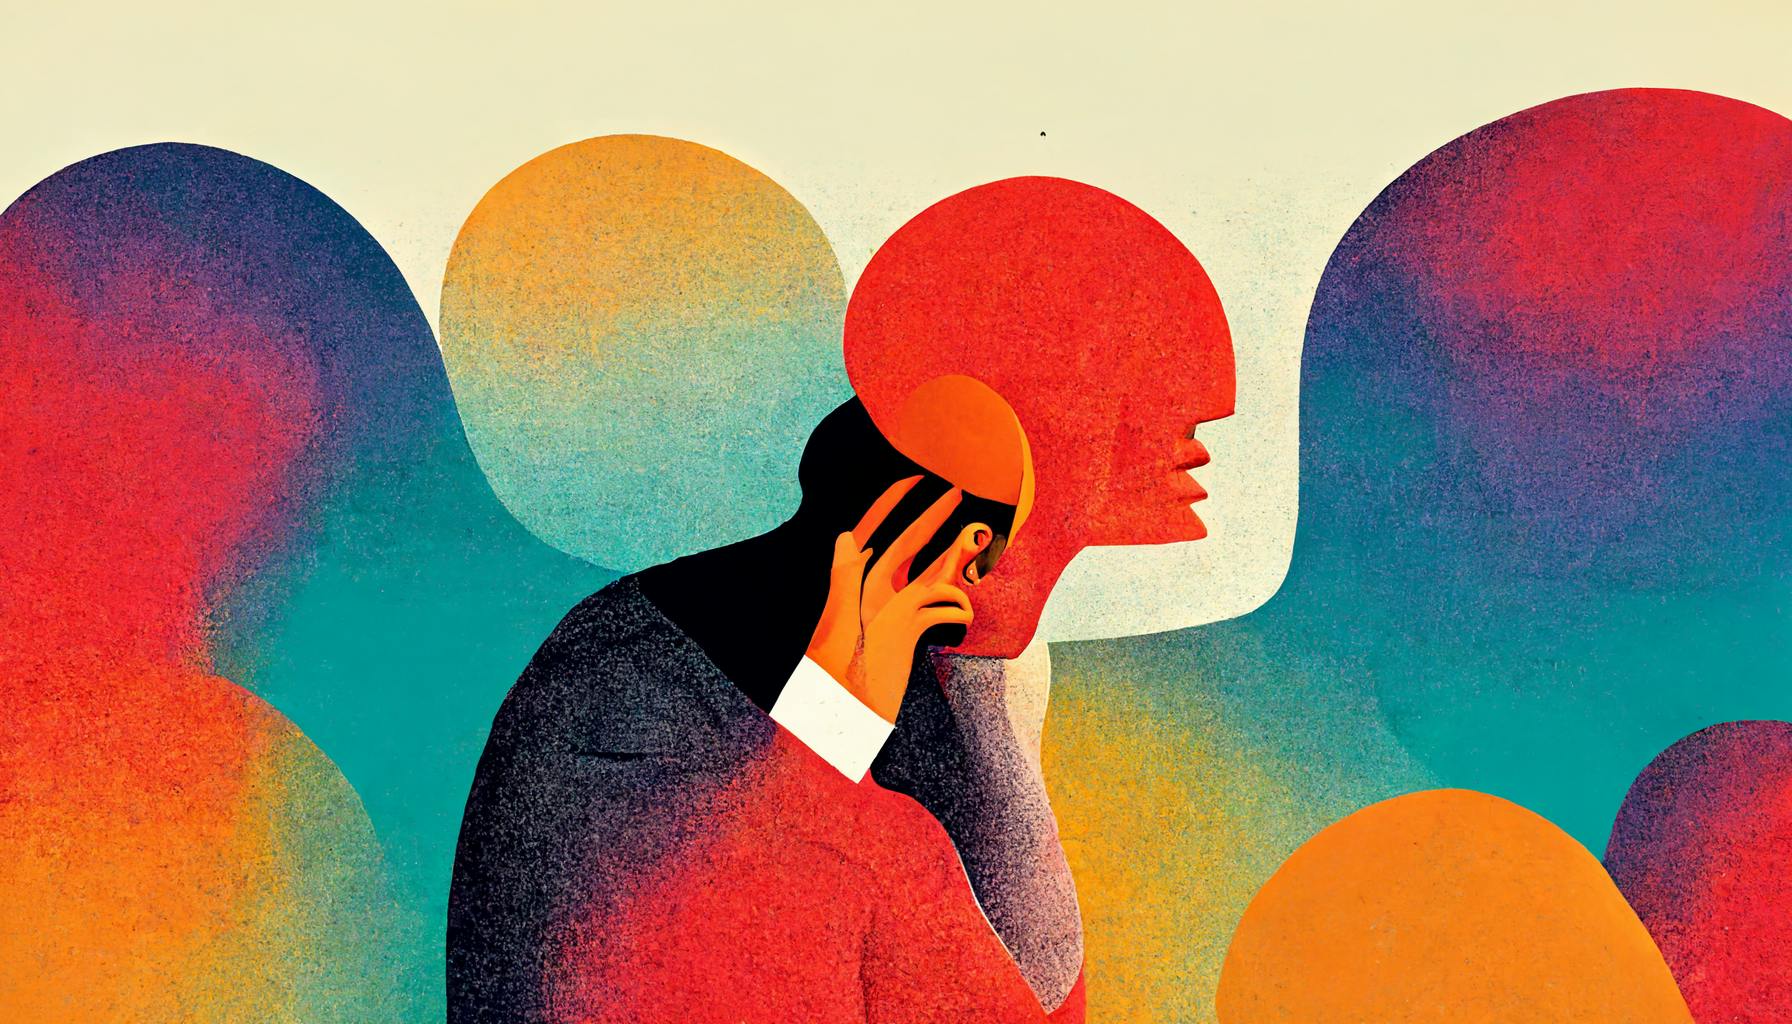 colourful editorial illustration of the distracted mind pulled in different directions, mental confusion or bewilderment